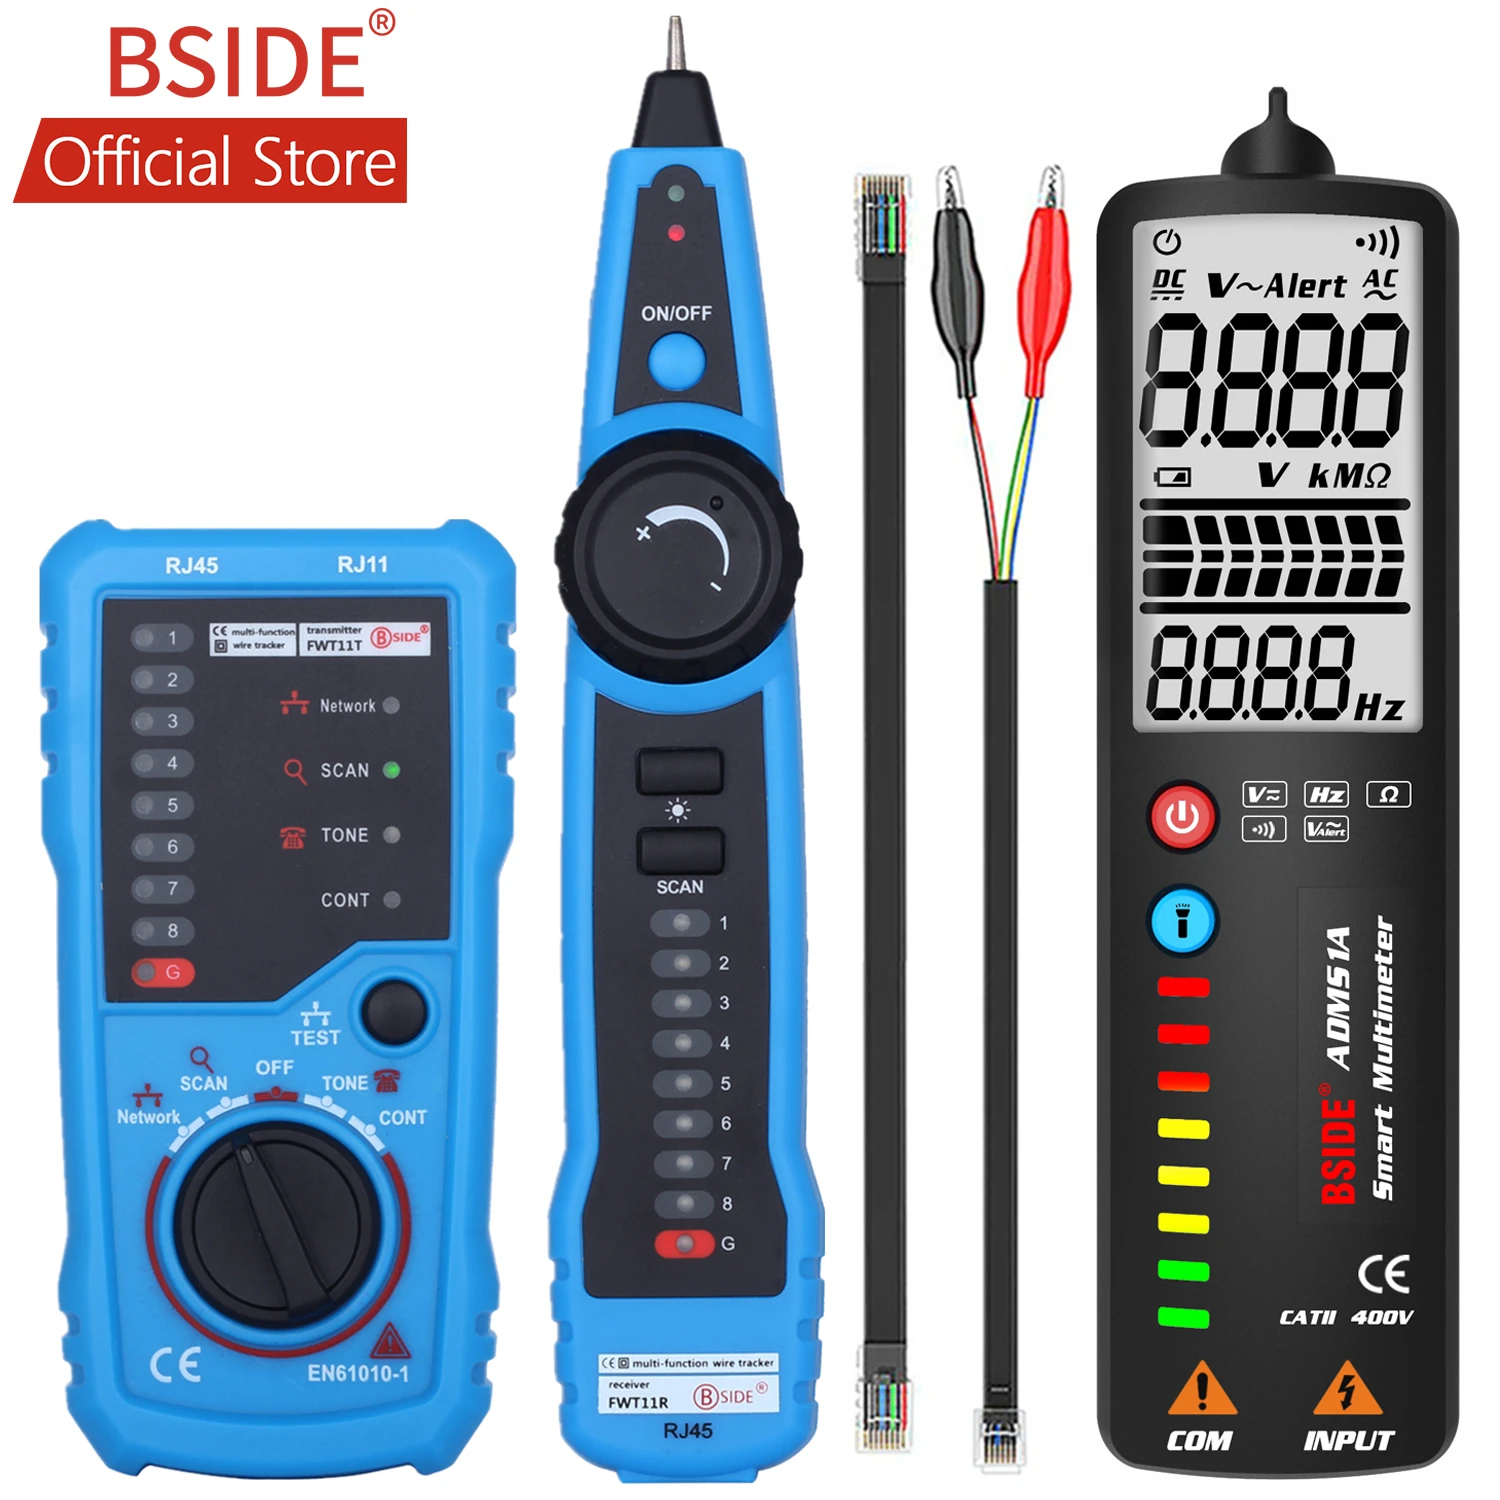 1 micrometer BSIDE FWT11 High Quality RJ11 RJ45 Cat5 Cat6 Telephone Wire Tracker Tracer Toner Ethernet LAN Network Cable tester Line Finder water submeter